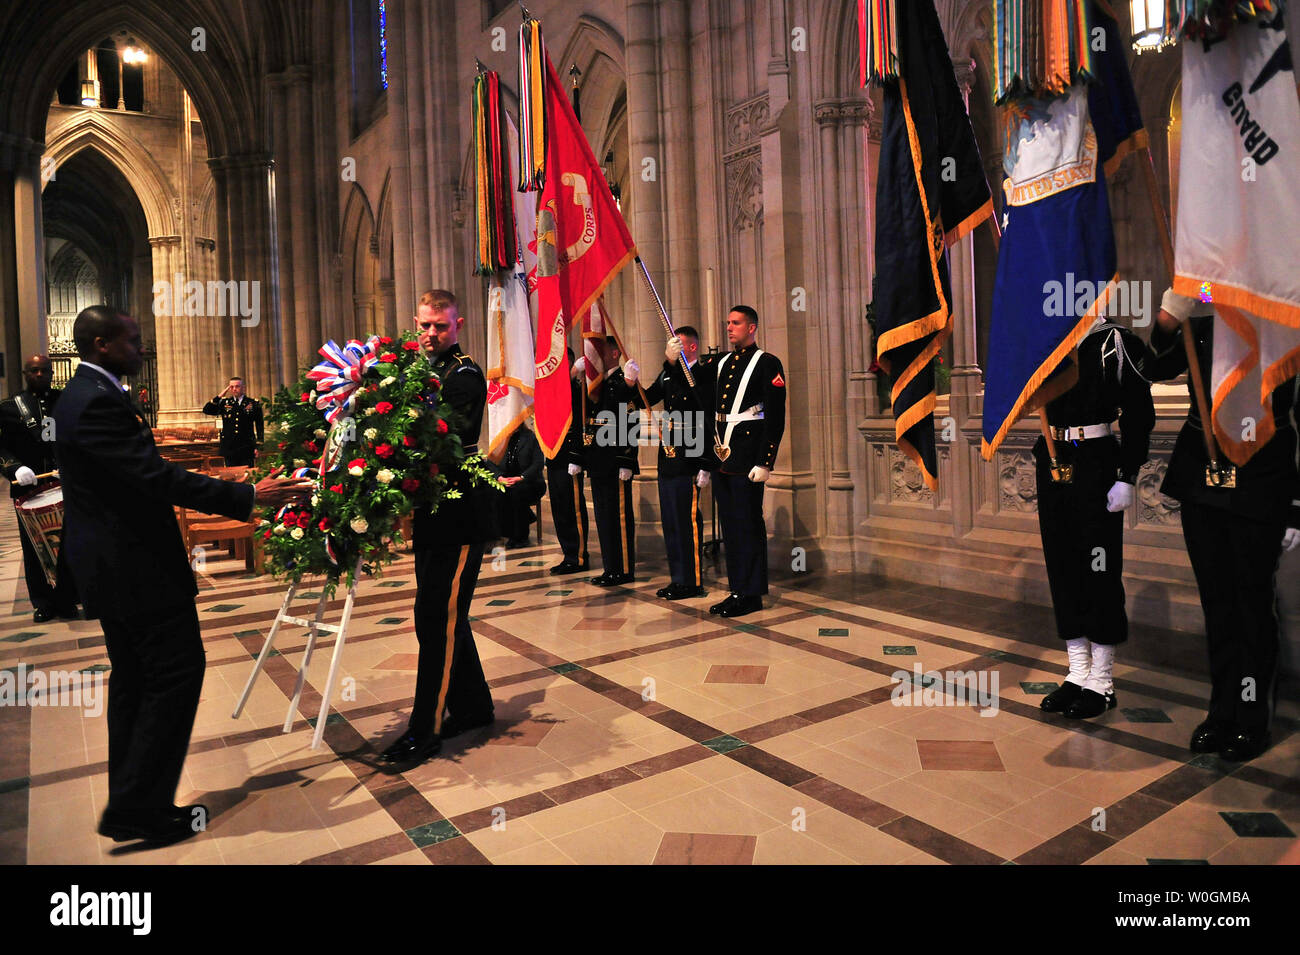 Air Force Major General Darren W. McDew (L), Commander of the Air Force District of Washington, participates in a Wreath Laying Ceremony with members of an Army Honor Guard for the 156 anniversary of President Woodrow Wilson birth at his tomb at the Washington National Cathedral in Washington on December 28, 2011. UPI/Kevin Dietsch Stock Photo